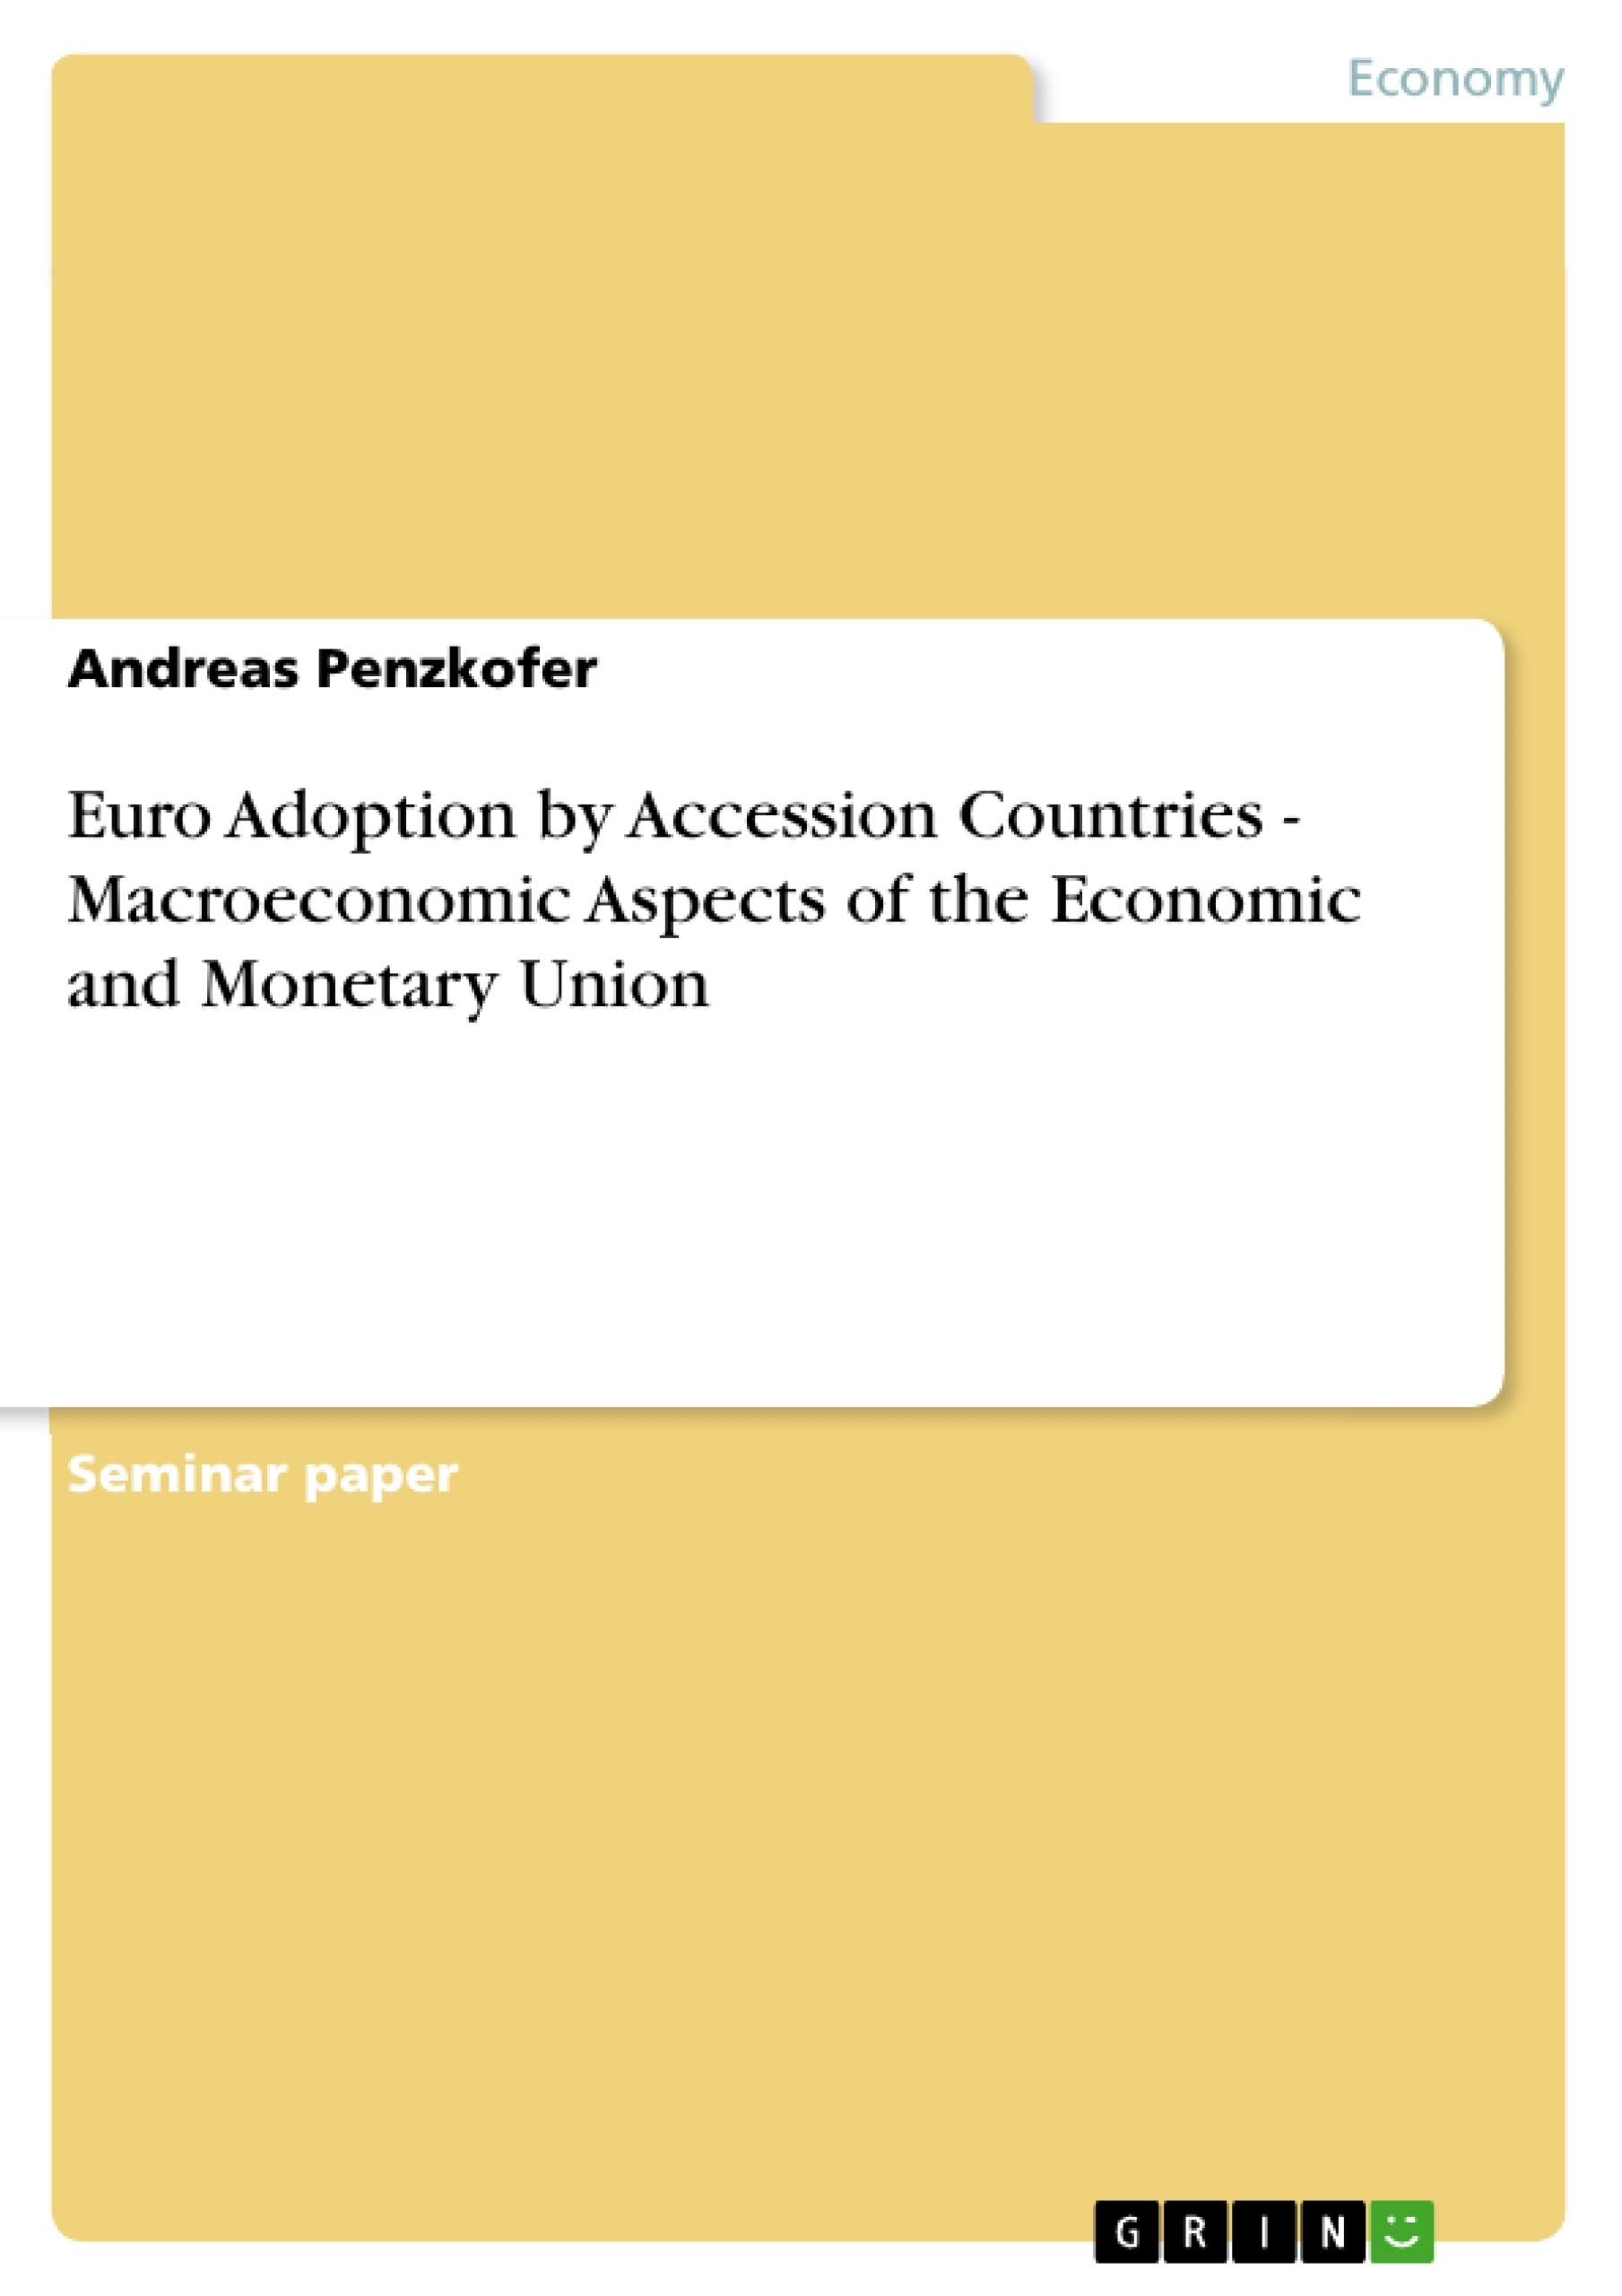 Title: Euro Adoption by Accession Countries - Macroeconomic Aspects of the Economic and Monetary Union